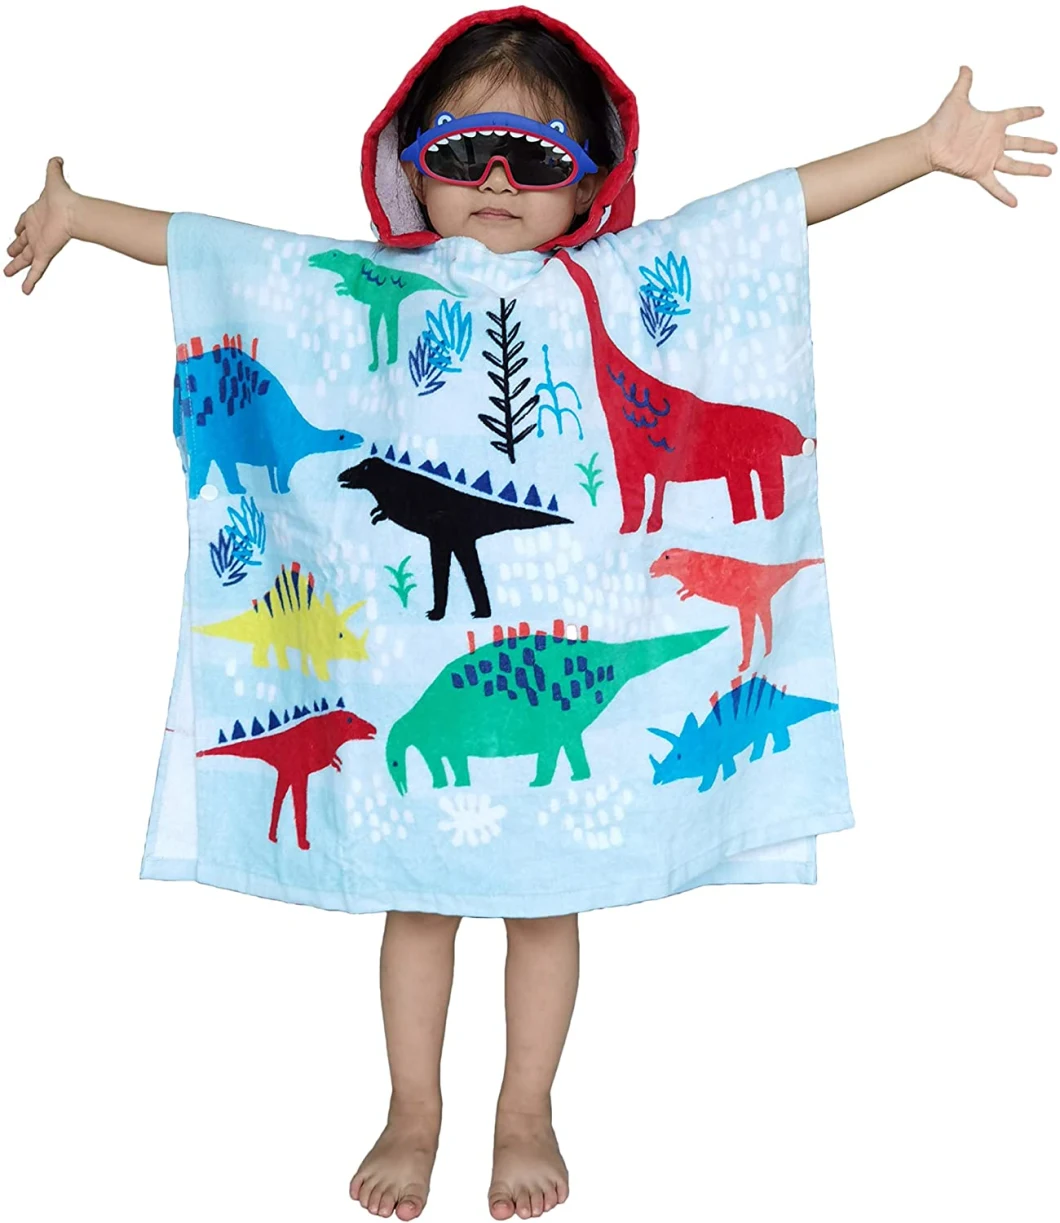 100% Cotton Kids Hooded Towel Poncho for Beach Pool Bath Swim Boating Surfing Cover-up Cape for Boys and Girls Toddlers, Dinosaurs with Hooded